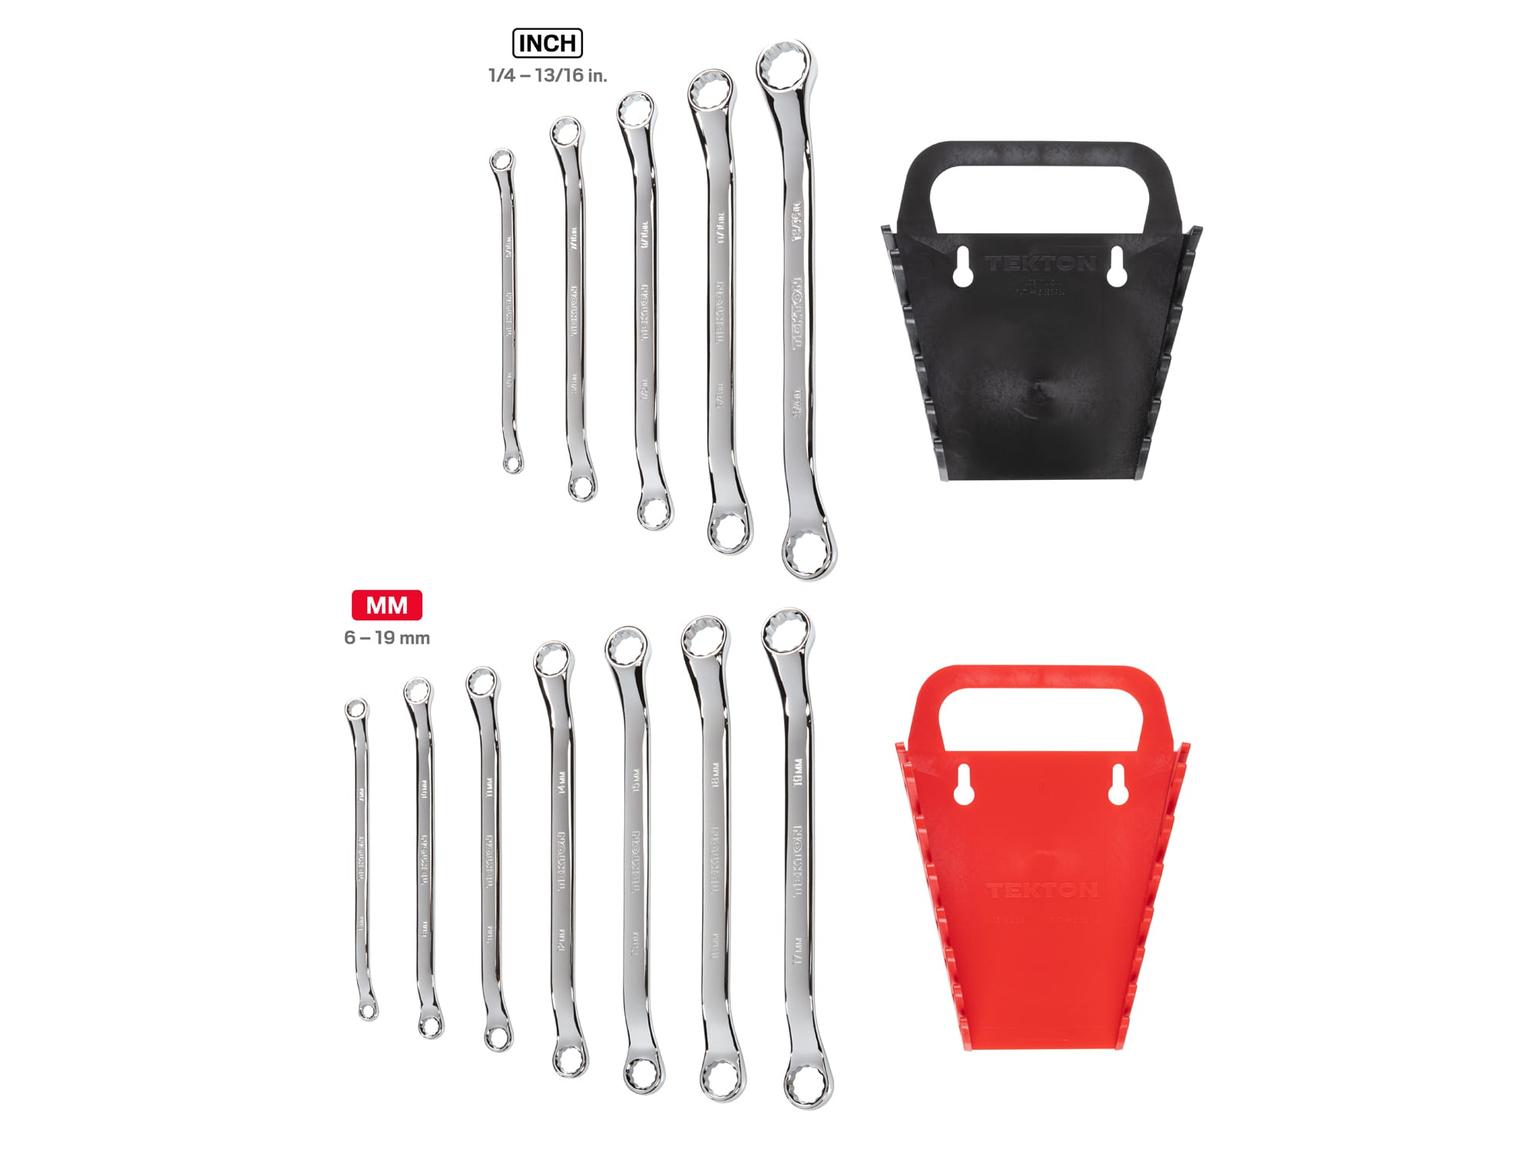 TEKTON WBE91301-T 45-Degree Offset Box End Wrench Set with Holder, 12-Piece (1/4-13/16 in., 6-19 mm)